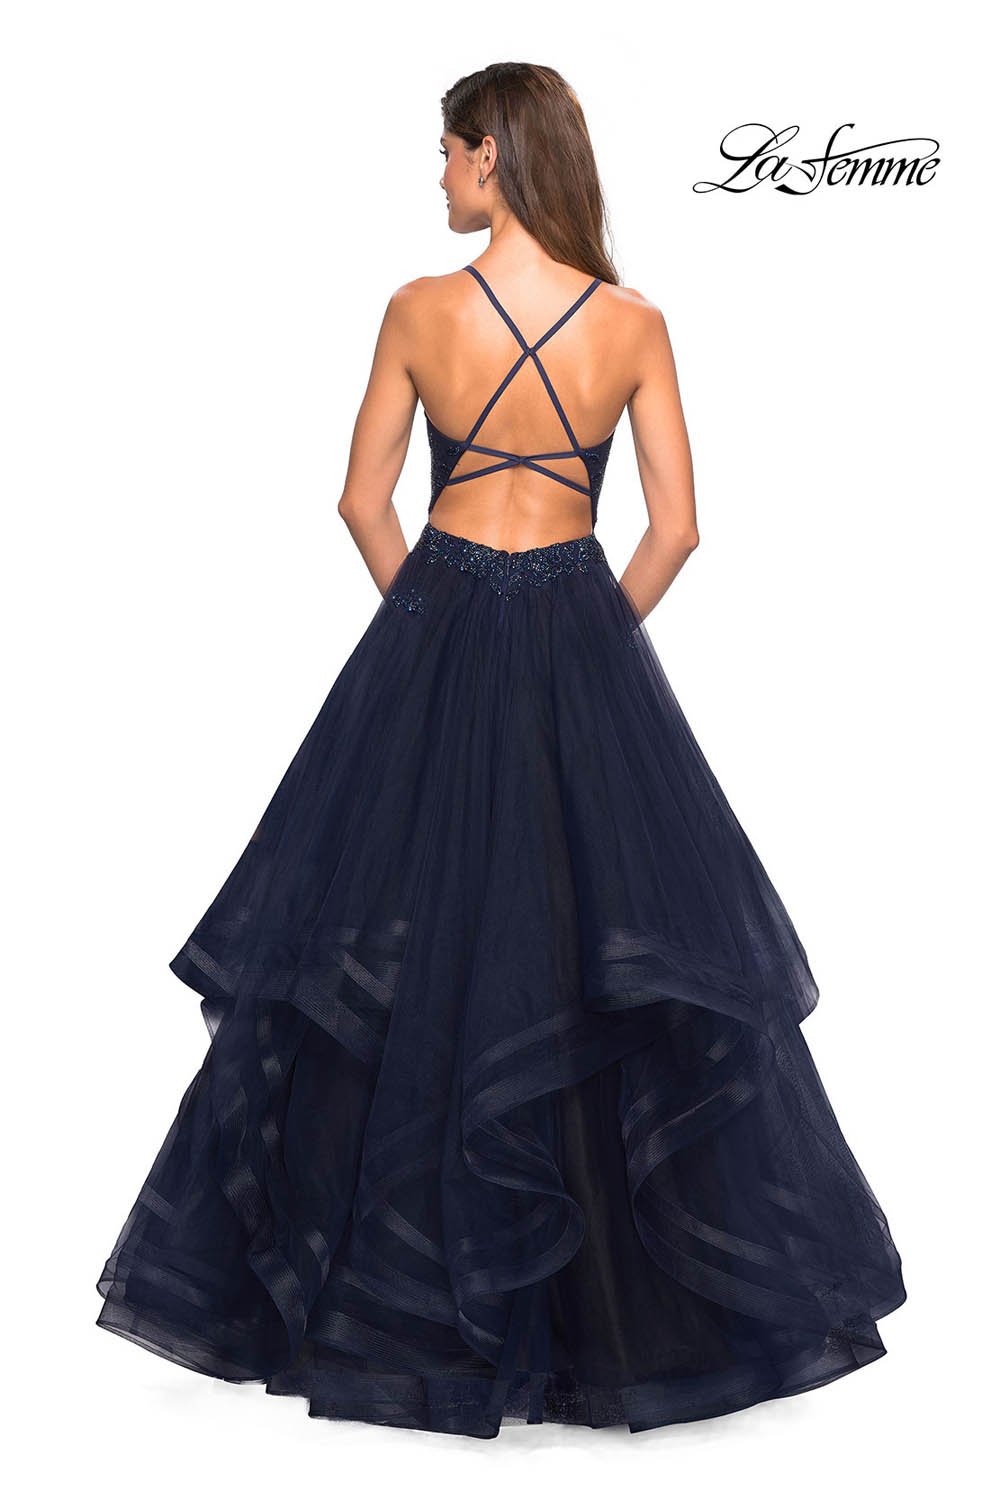 La Femme 27192 dress images in these colors: Navy.